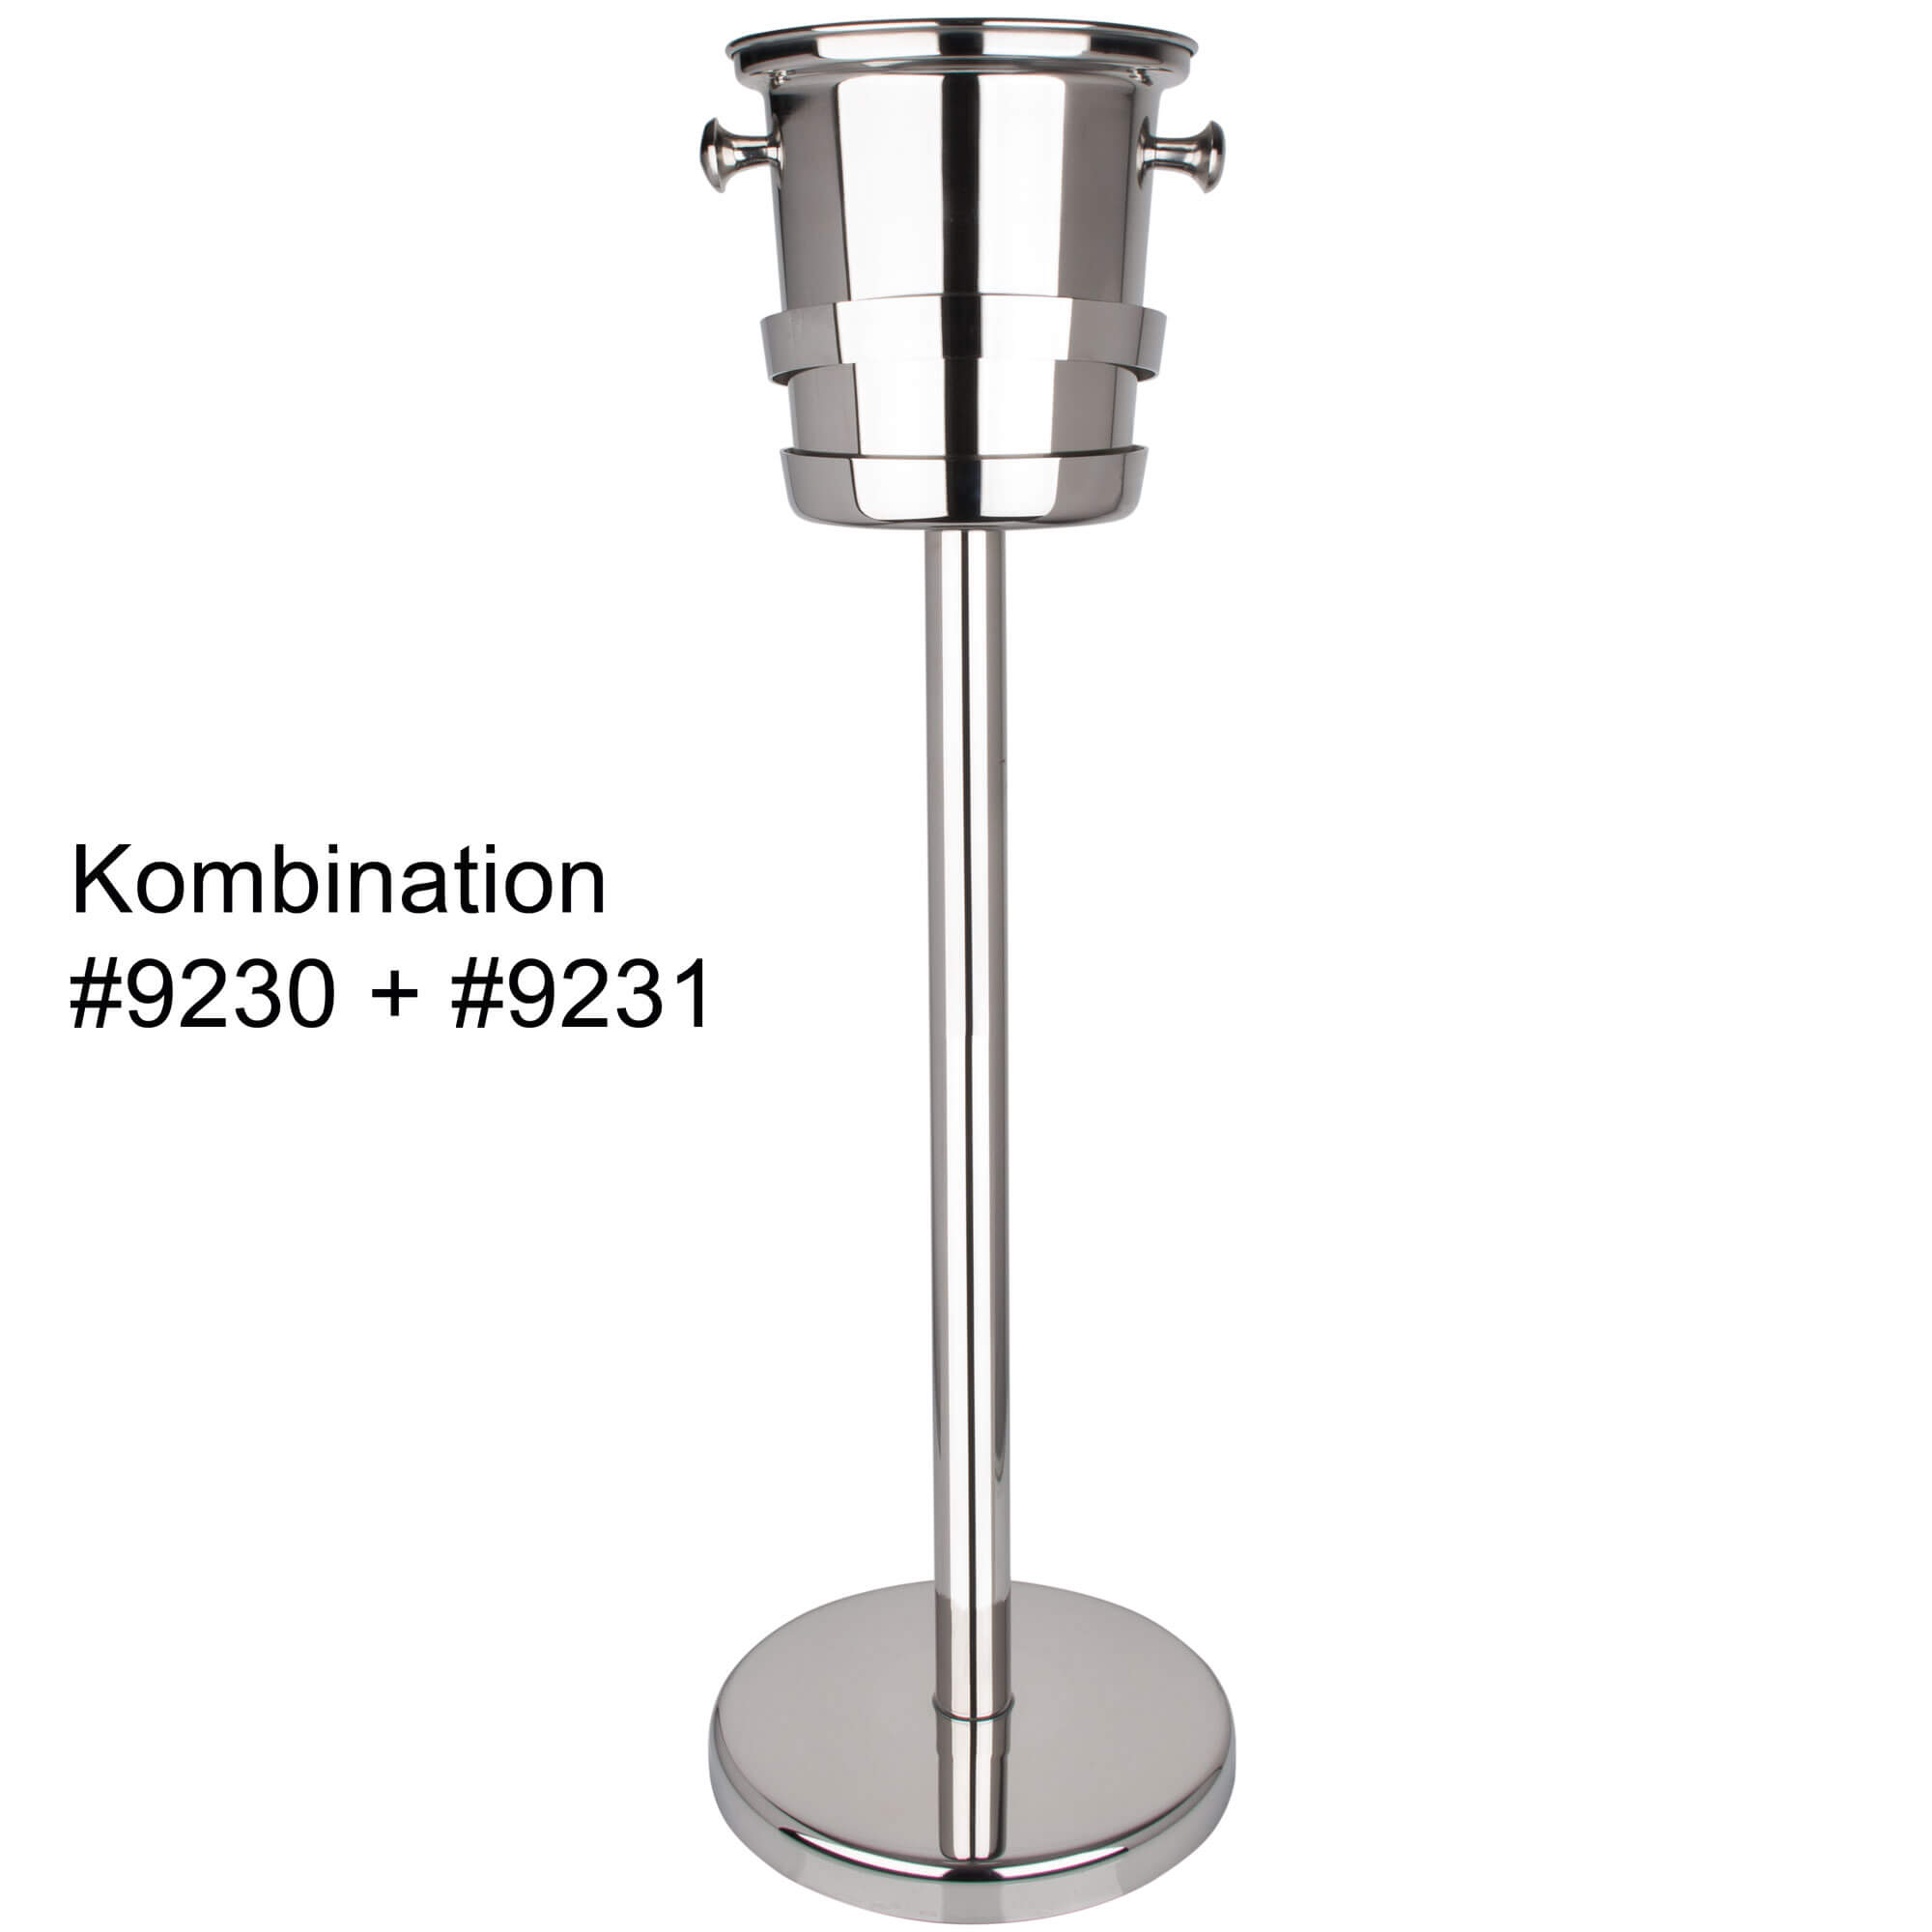 Stand for bottle cooler/ wine cooler, stainless steel - 17,5cm